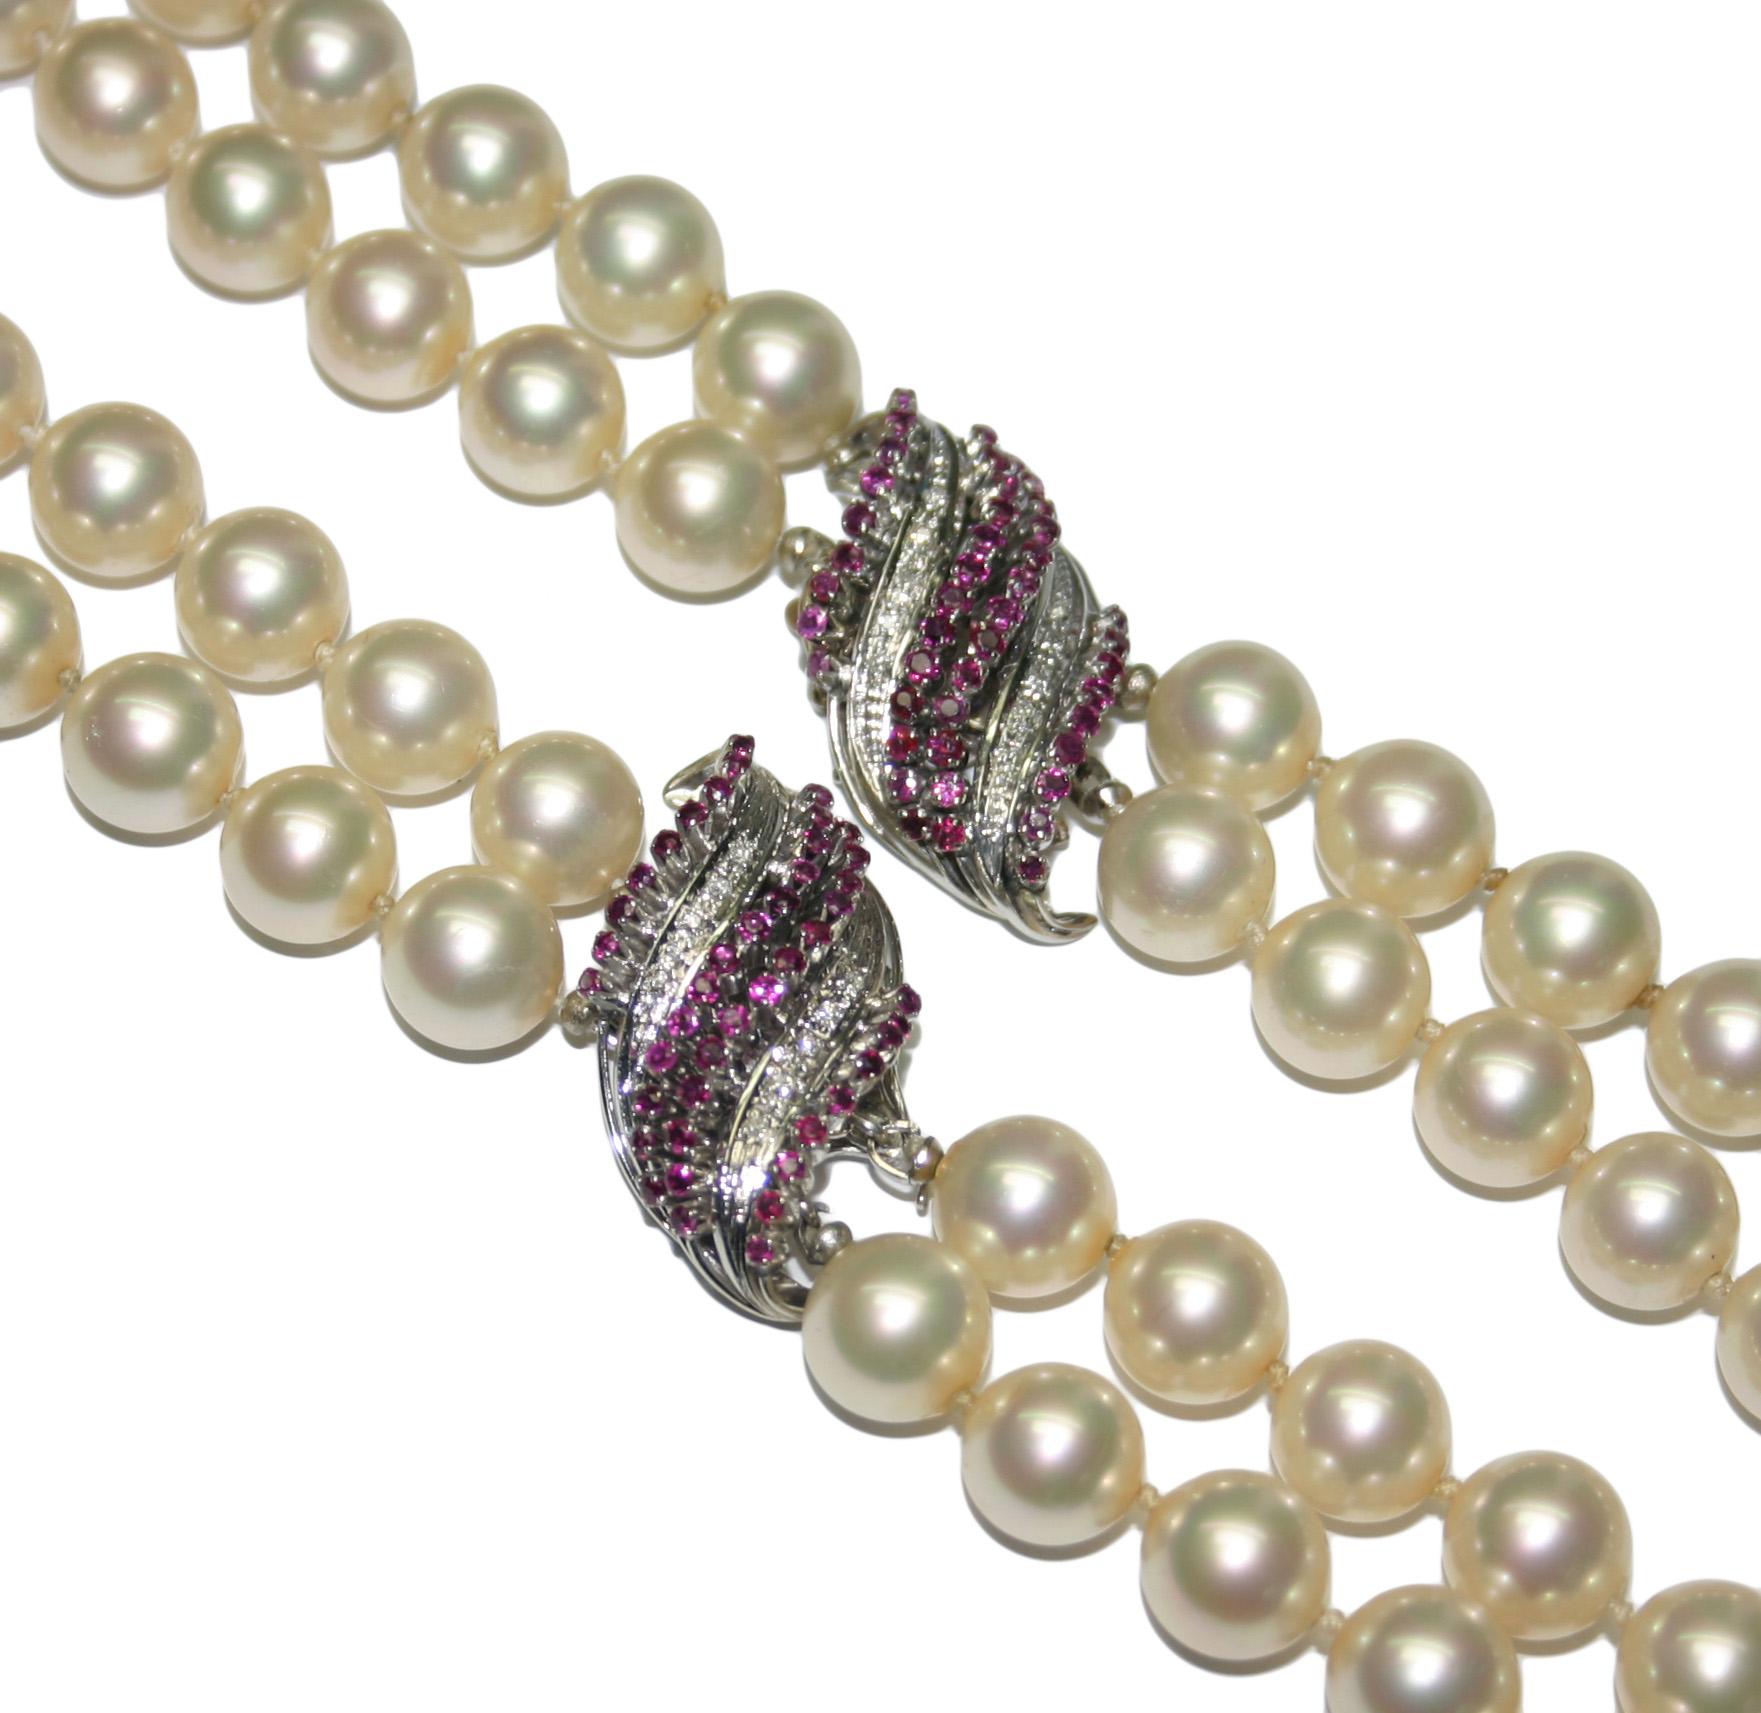 24 inch Faux Double Pearl Strand with 18k White Gold Diamond and Ruby Clasps.

This necklace contains high end faux pearls with 0.50 total carats of diamonds and 2.00 total carats of rubies on each clasp.

This necklace is not marked 18k but tests